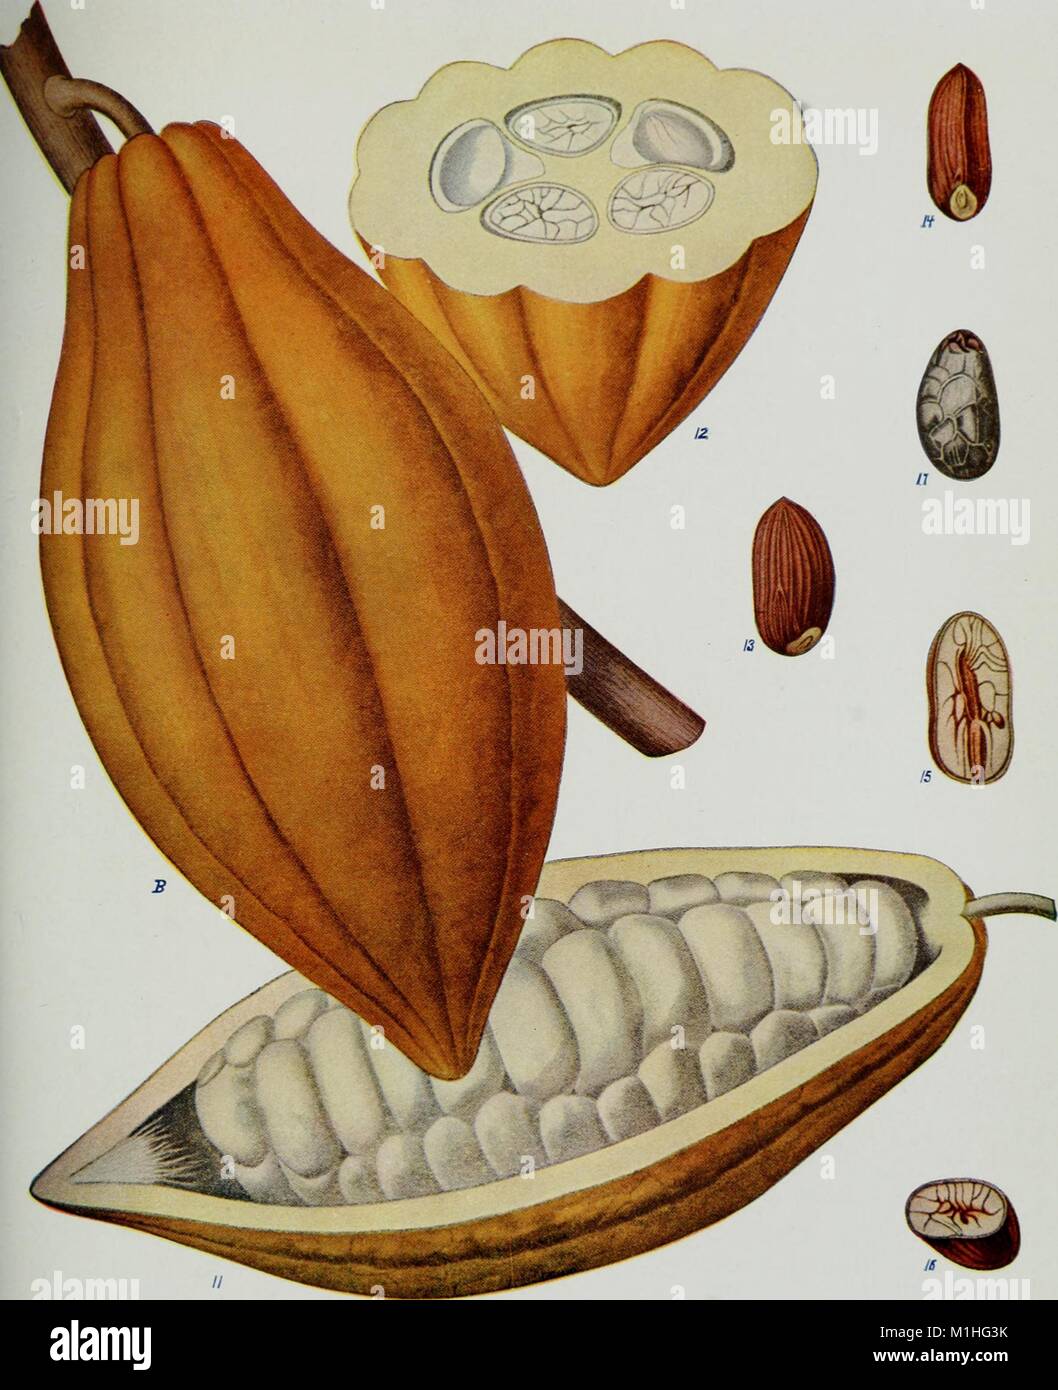 Color illustration of the parts of a cocoa pod, depicting the fruit, seed, and pericarp, whole, cut lengthwise and in cross-section, from Volume IV in the series 'Nature Neighbors' published in accordance with the American Audobon Association, 1914. () Stock Photo